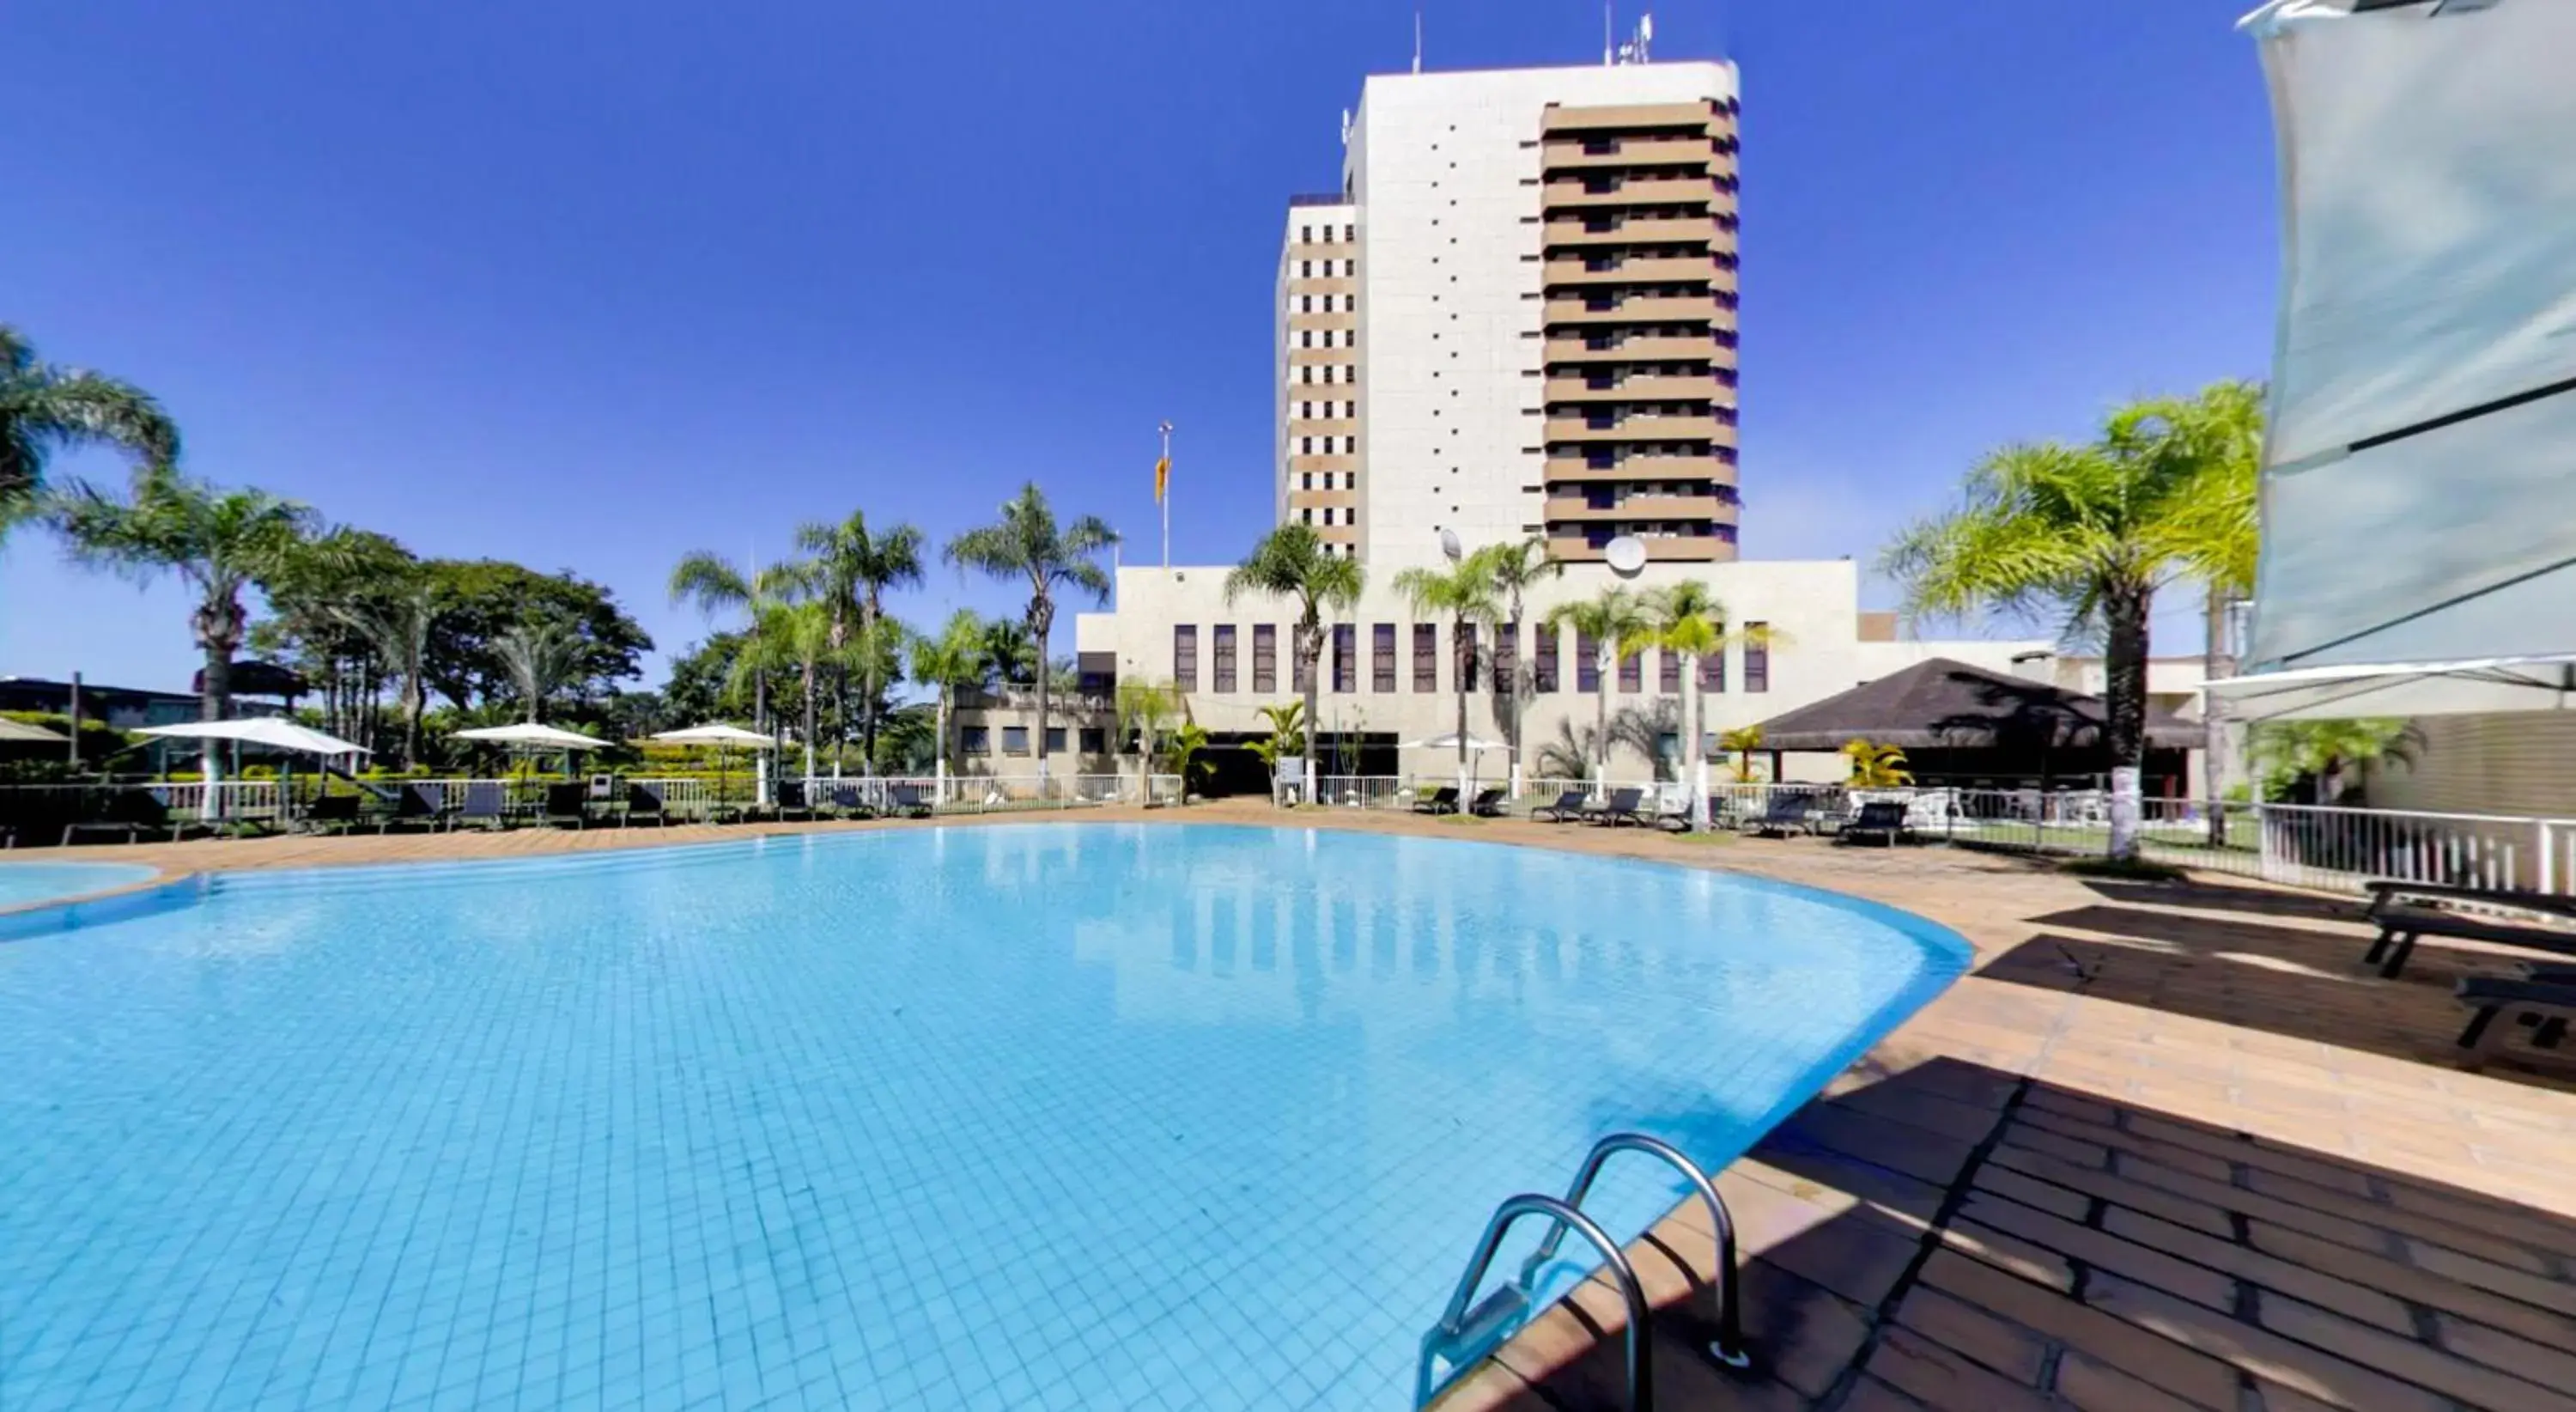 Property building, Swimming Pool in Marques Plaza Hotel